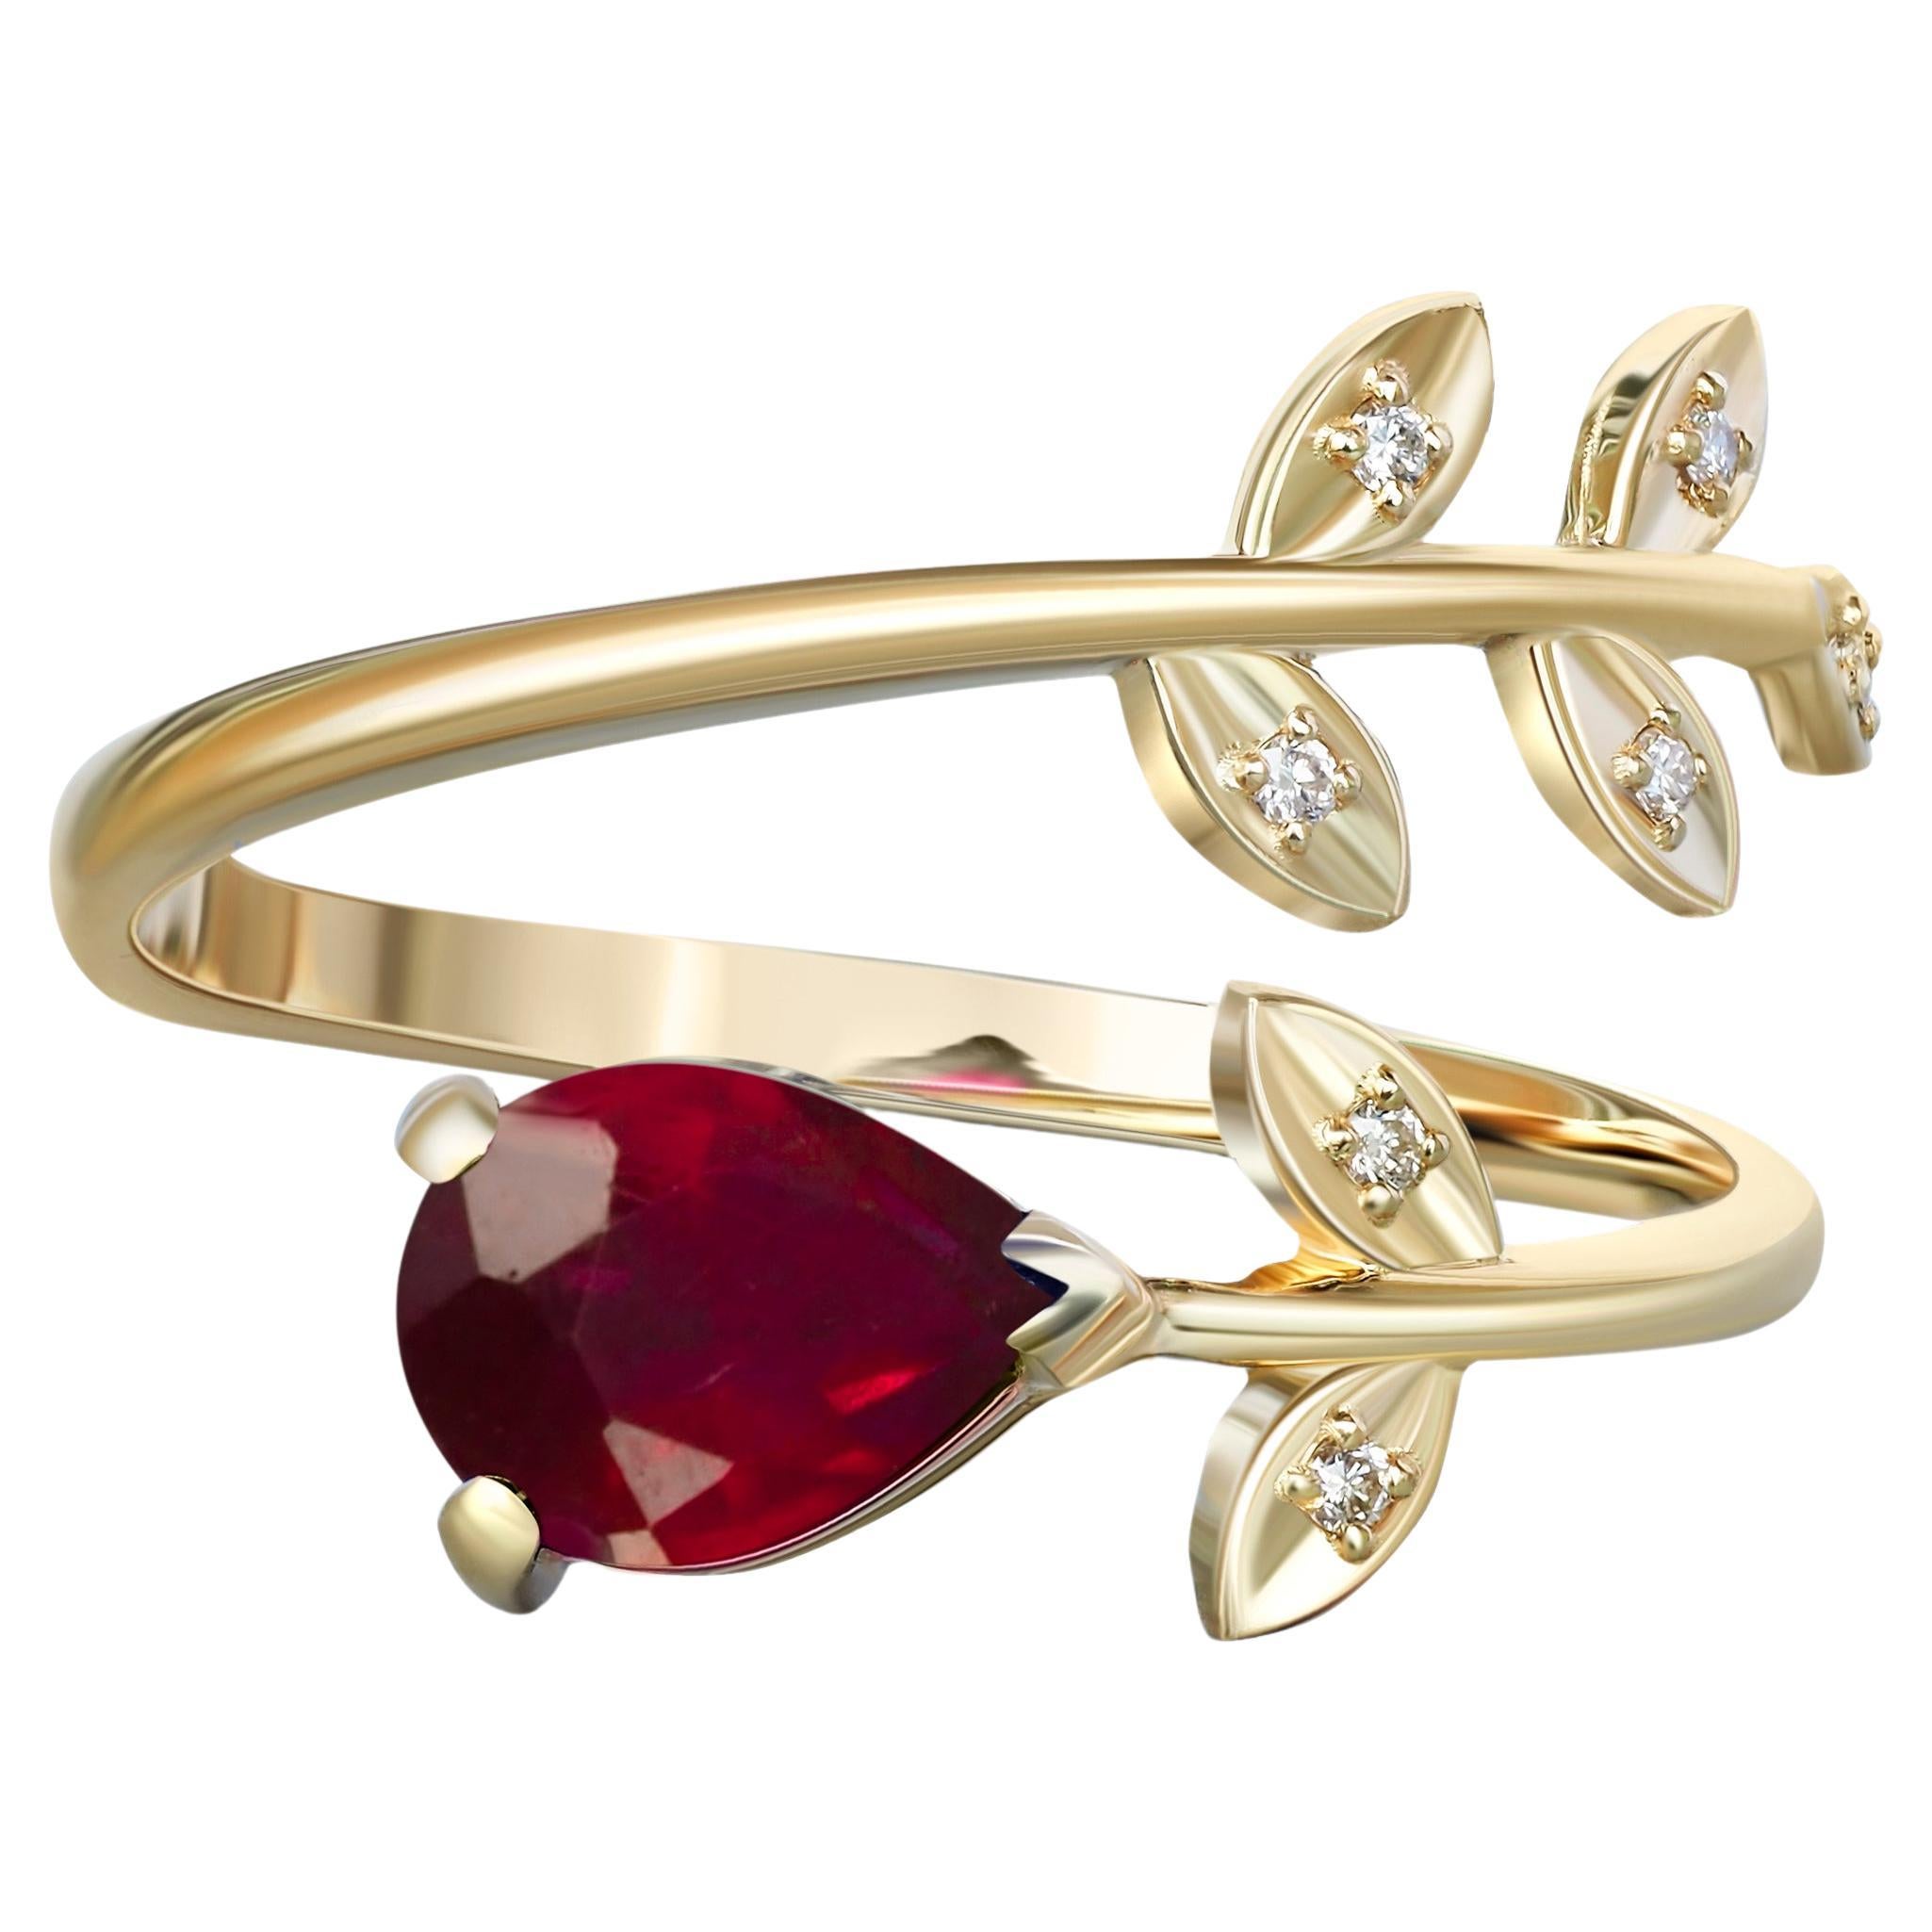 Pear ruby 14k gold ring. 